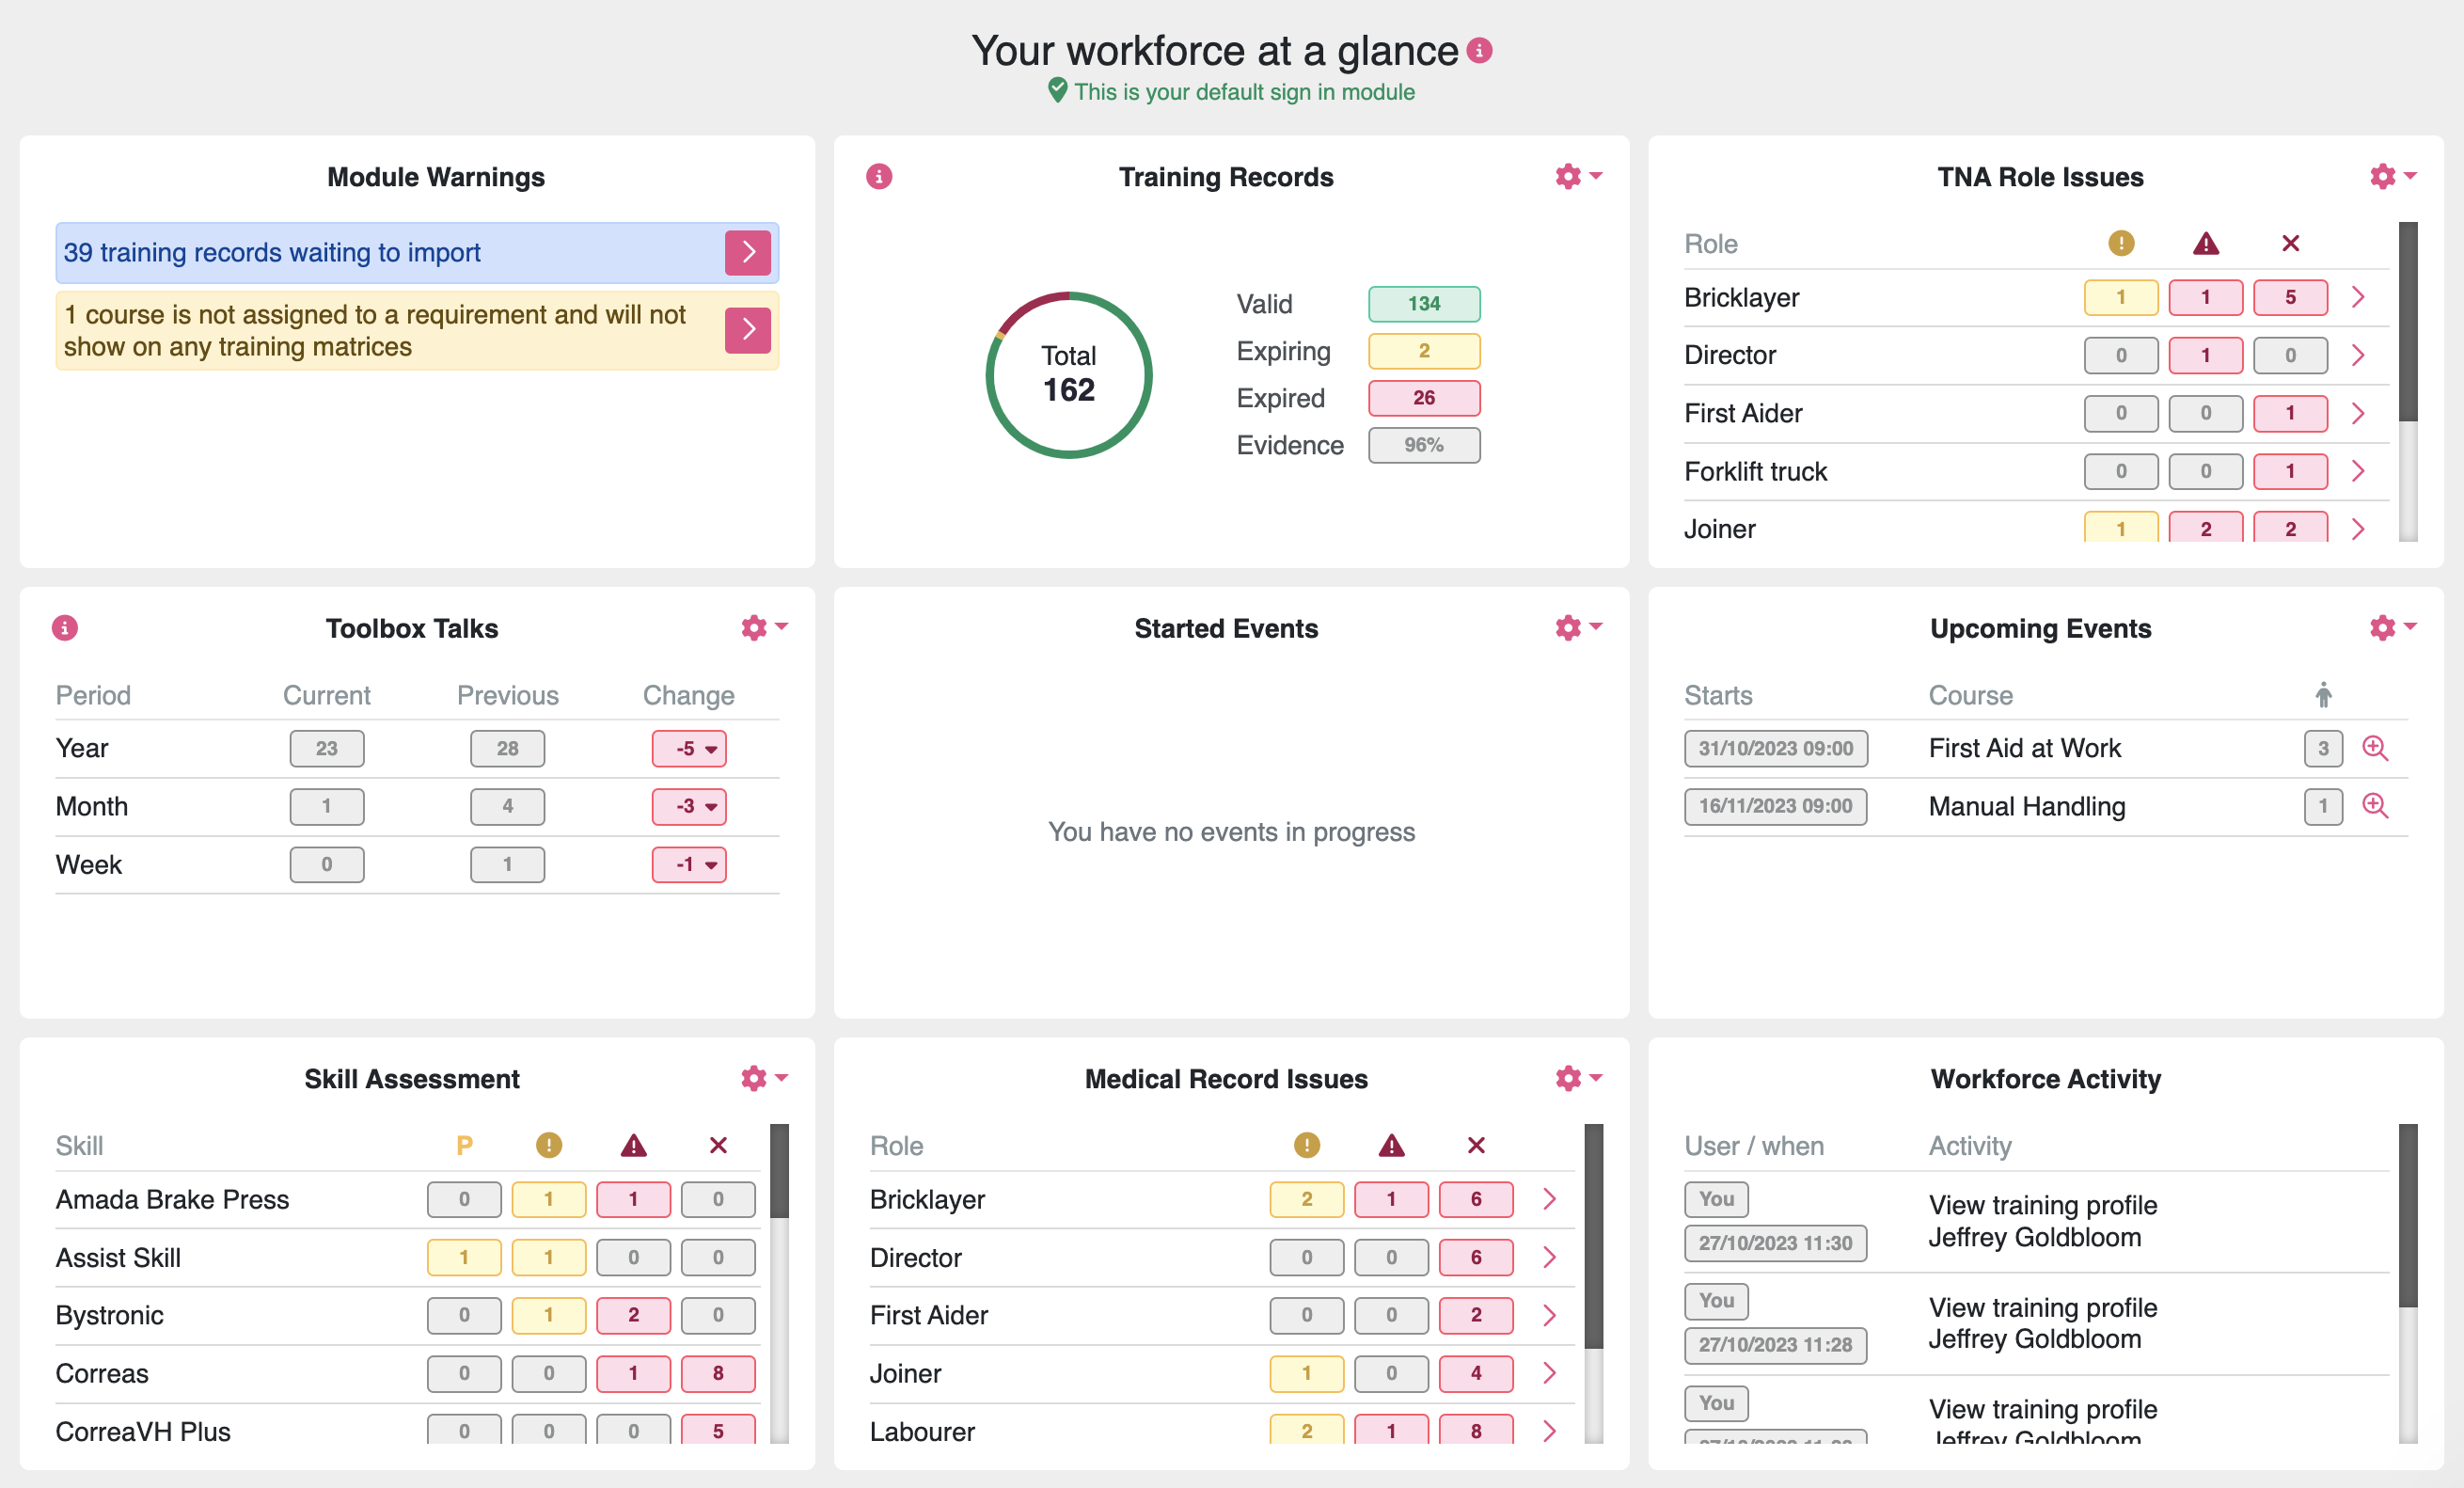 Screenshot showing the main Workforce Manager dashboard comprising warnings, training records, TNA role issues, toolbox talks, started events, upcoming events, skill assessment health, medical record issues and workforce activity.